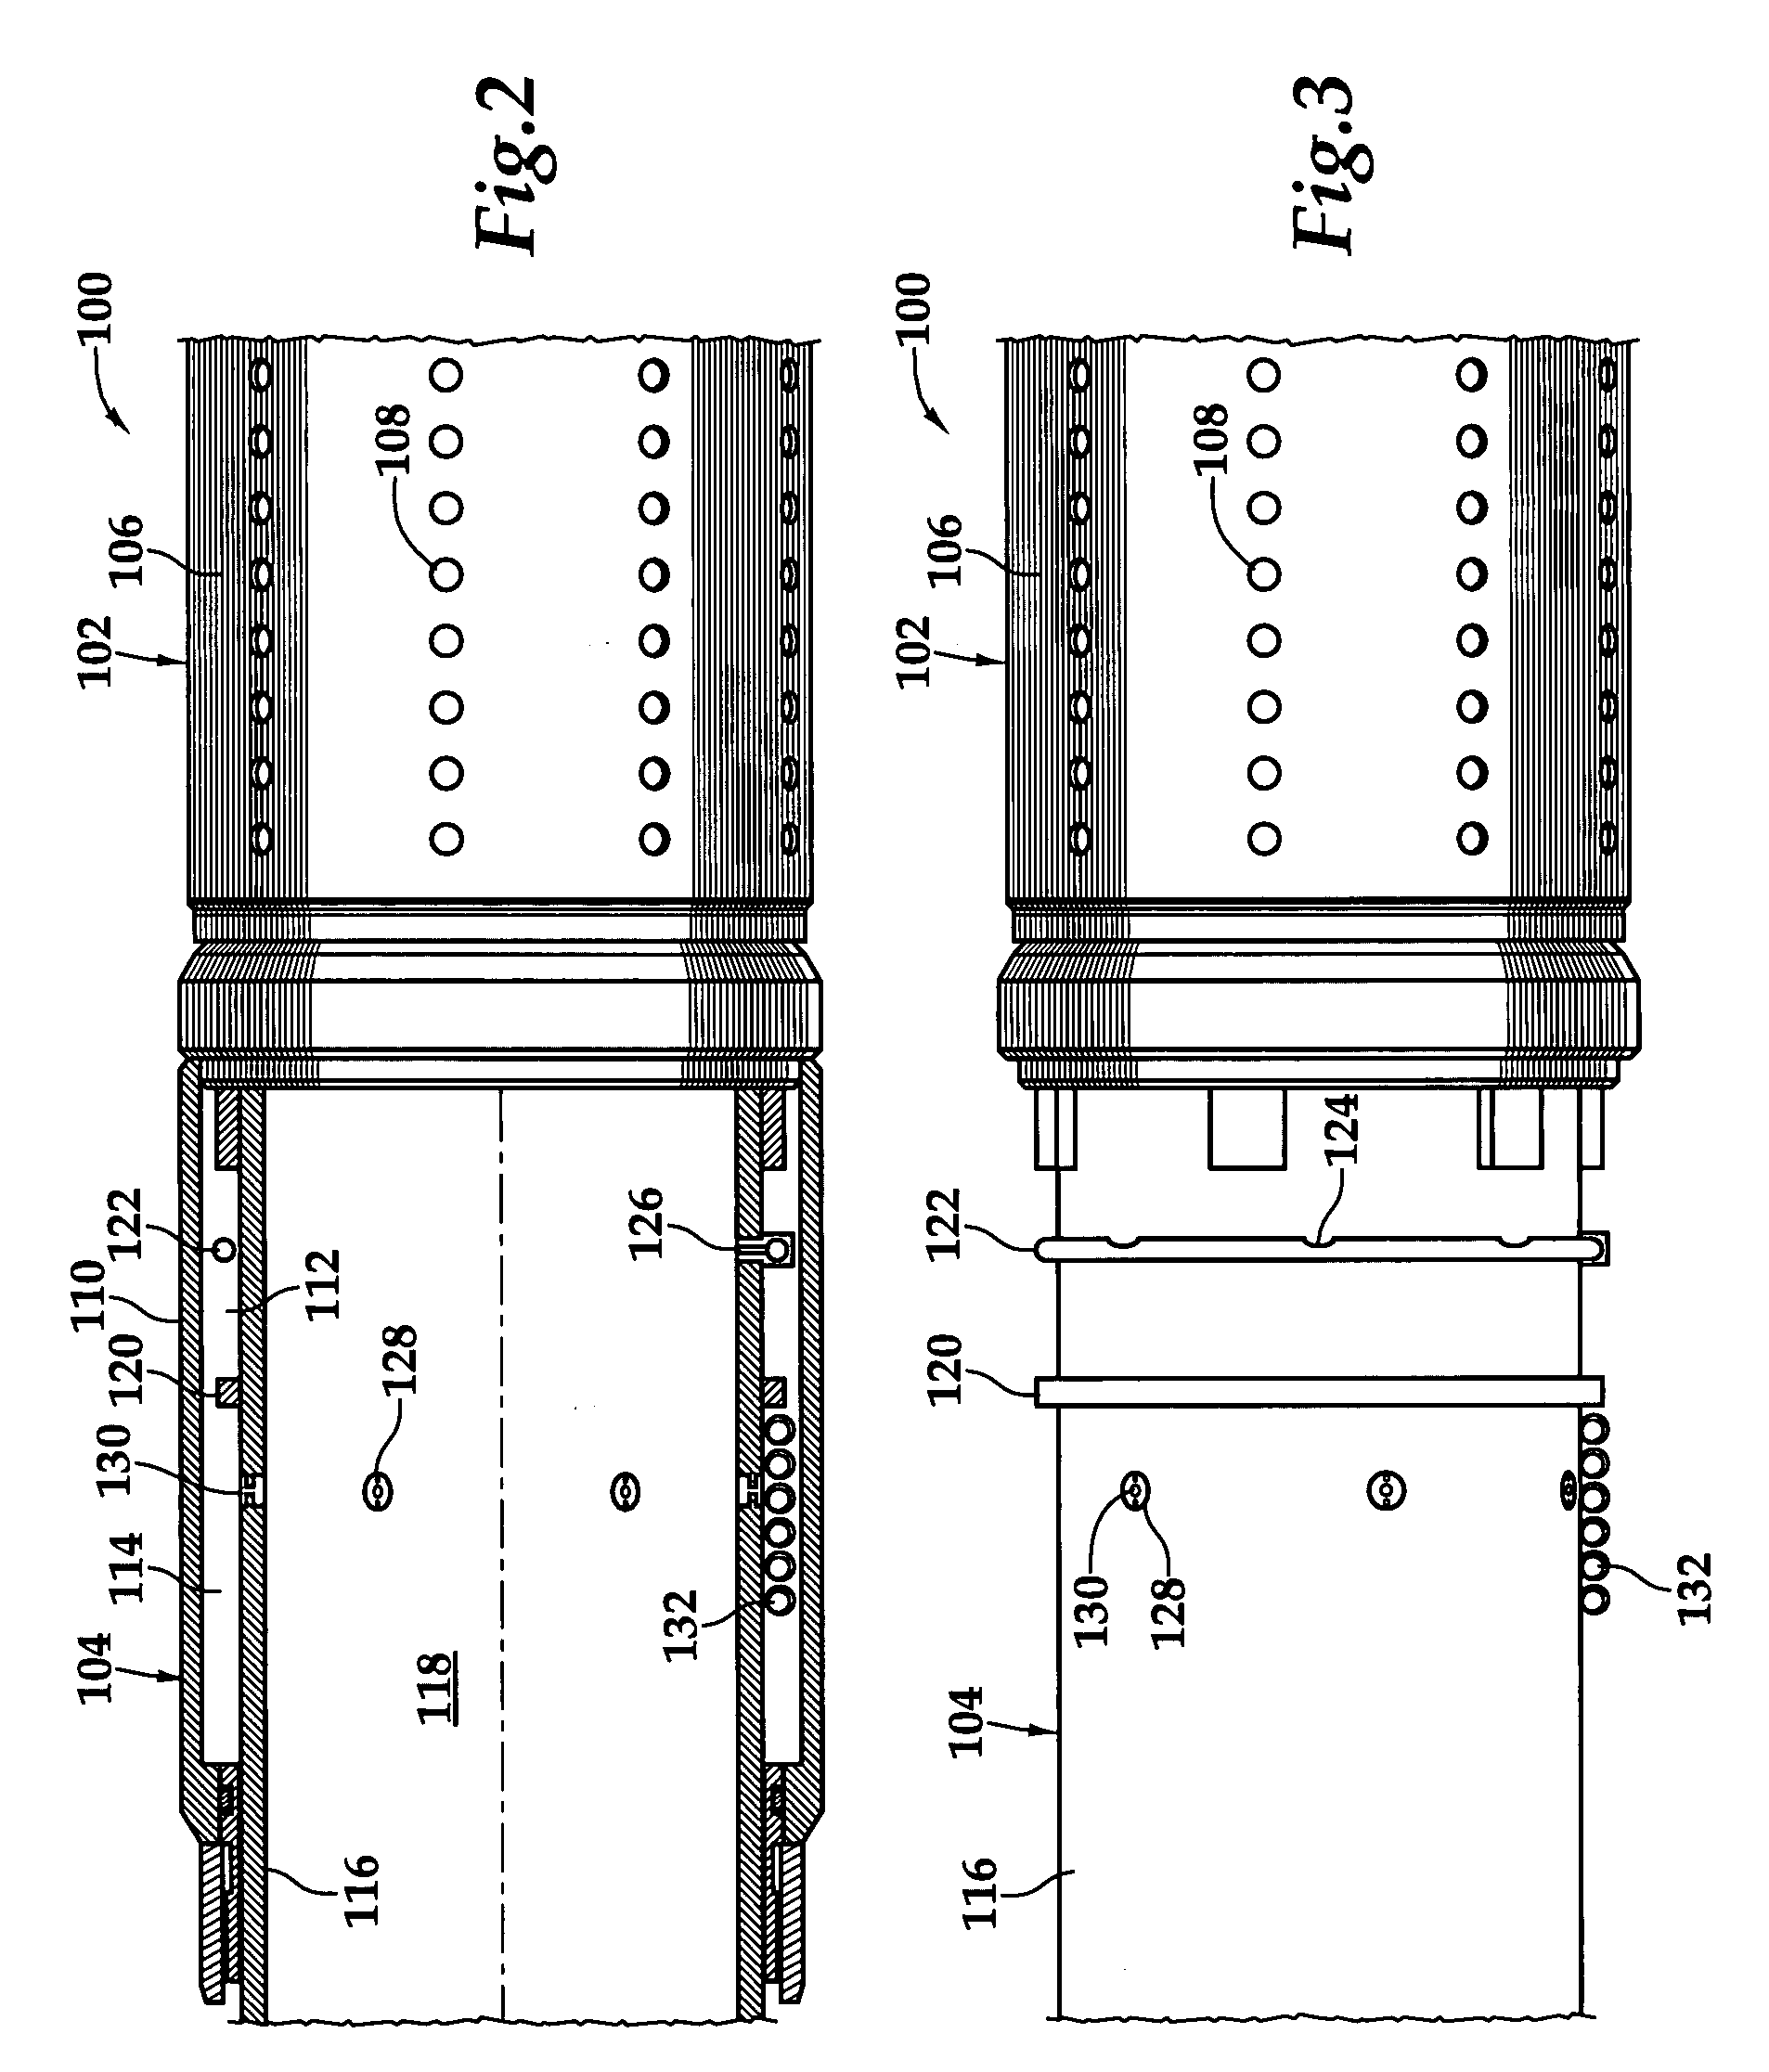 Apparatus for controlling the inflow of production fluids from a subterranean well